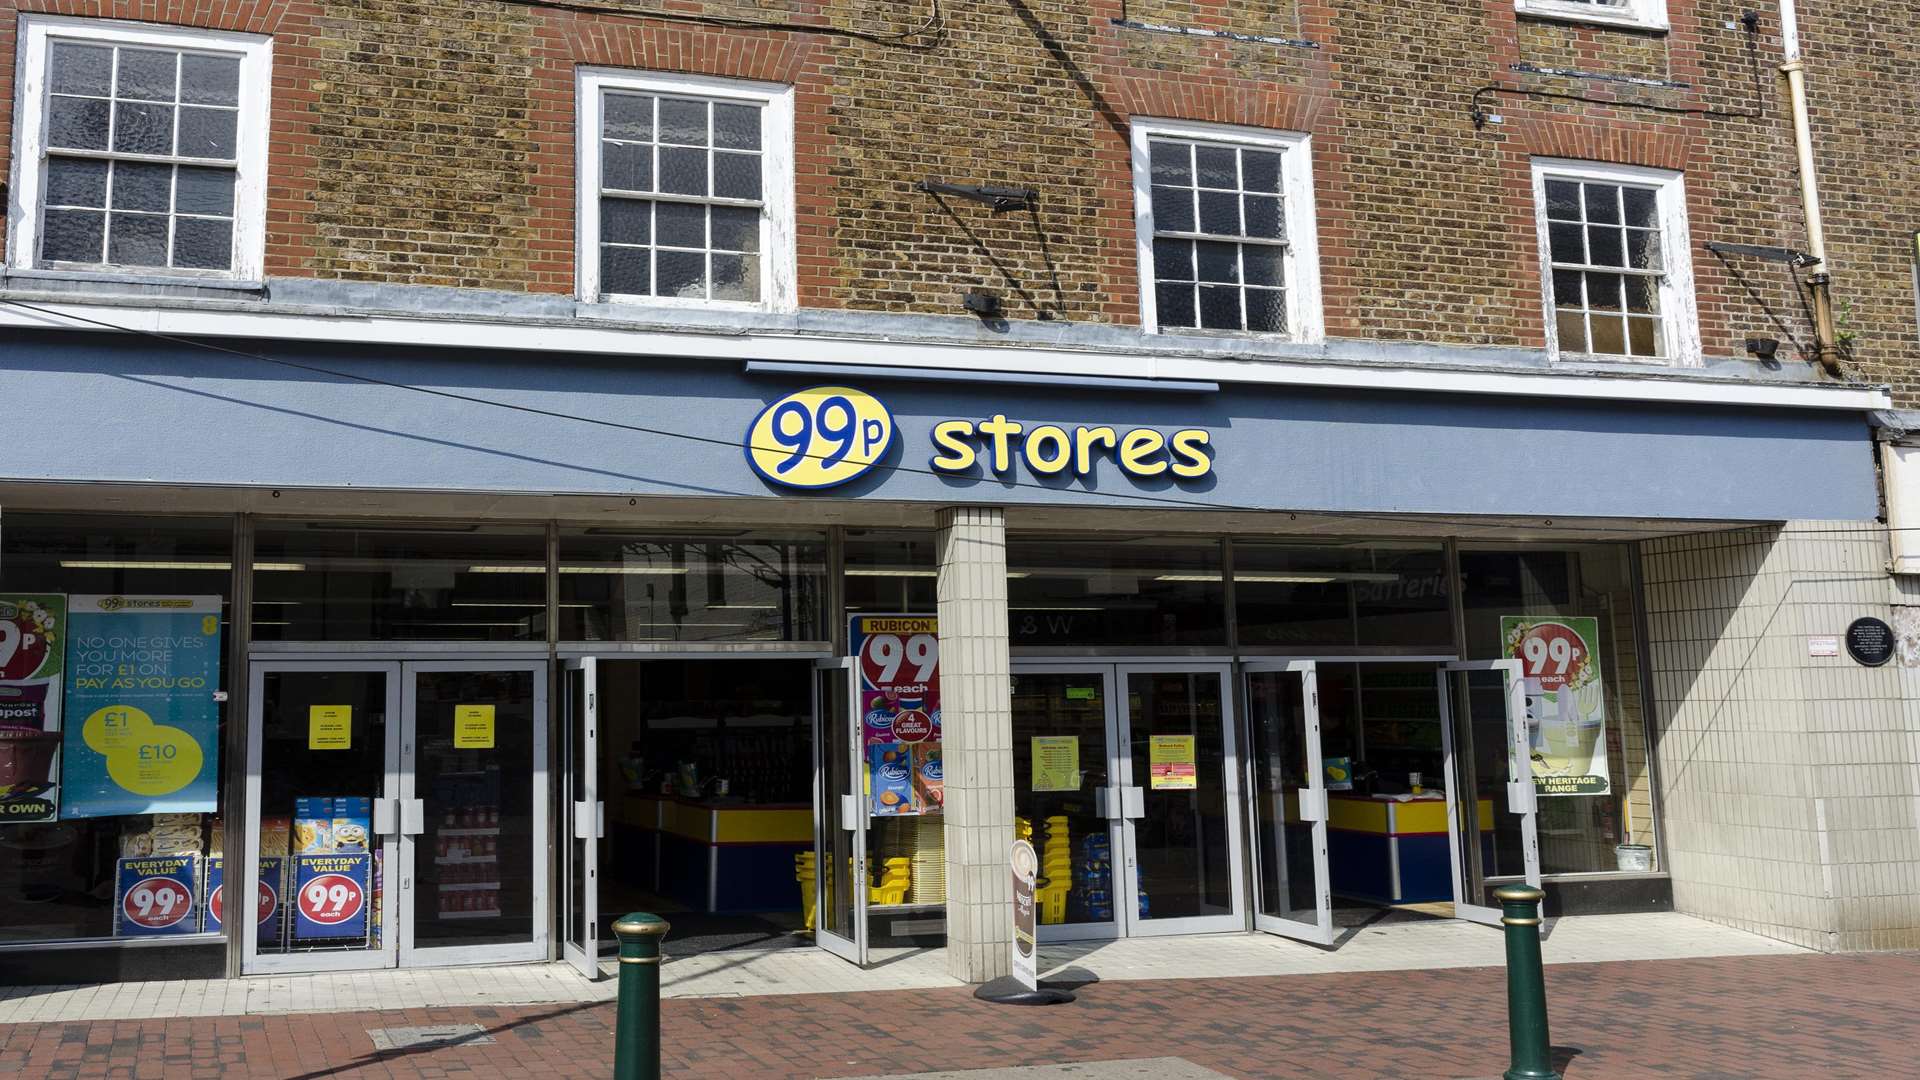 The incident happened at the 99p Store in Sittingbourne High Street